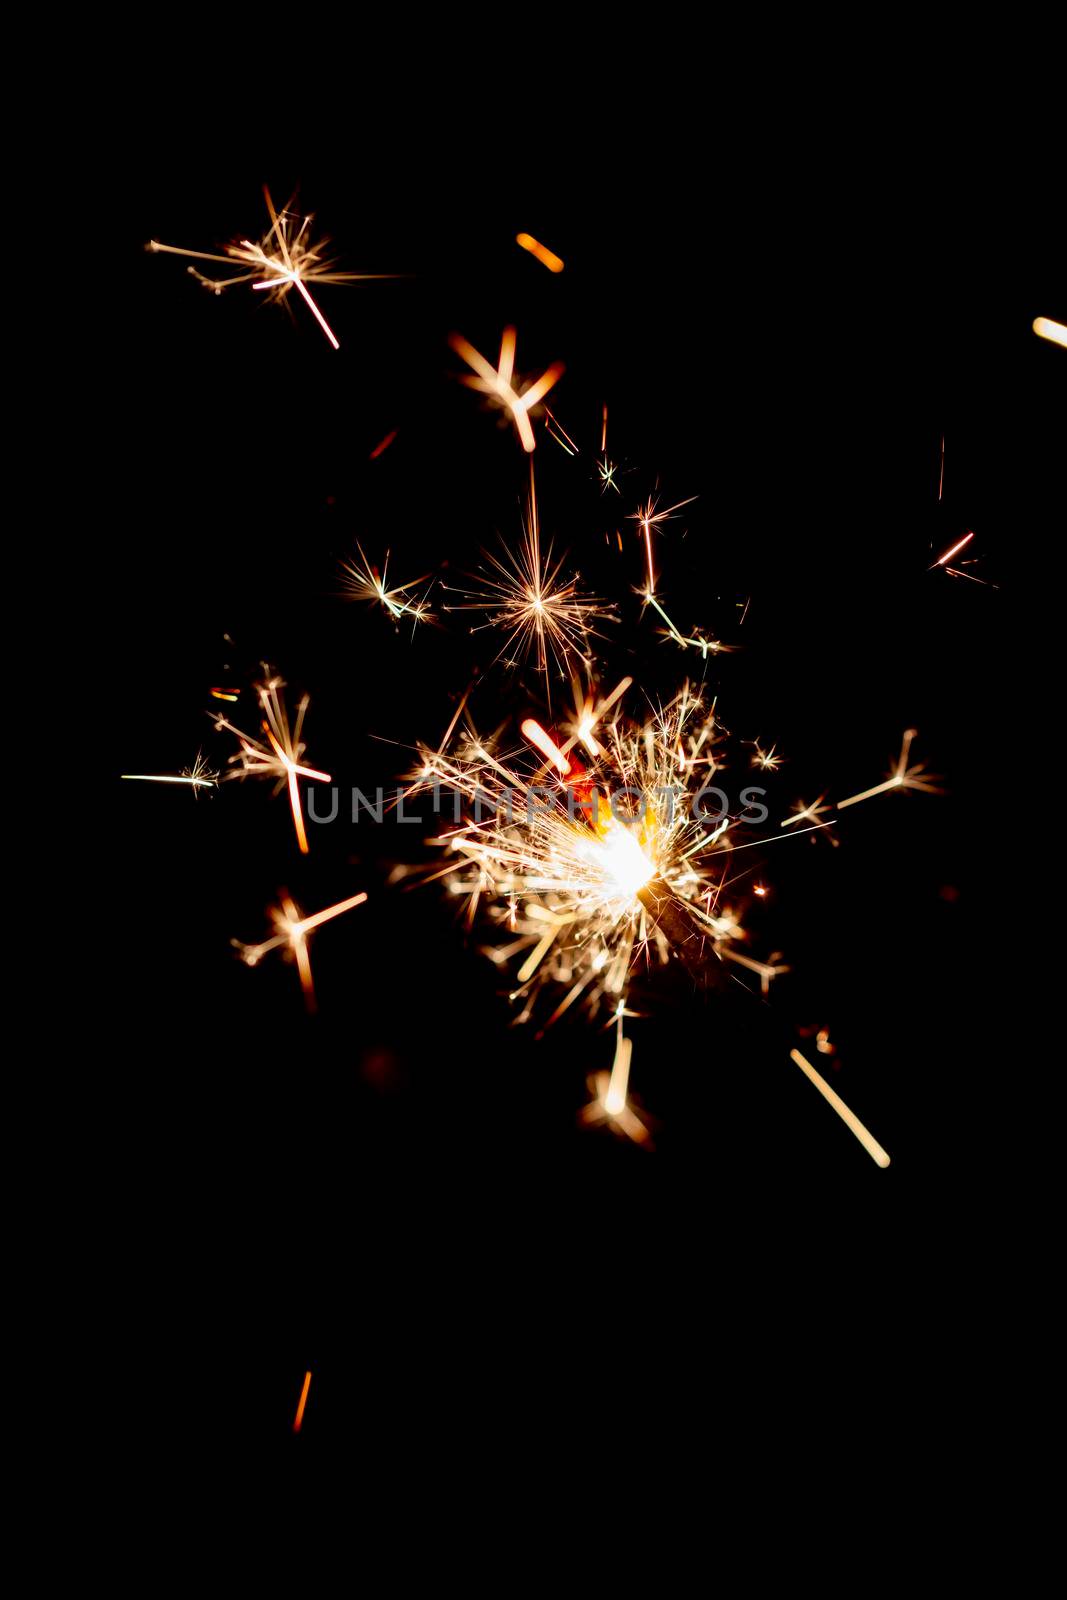 One bengal fire sparkles against the black background. by gitusik